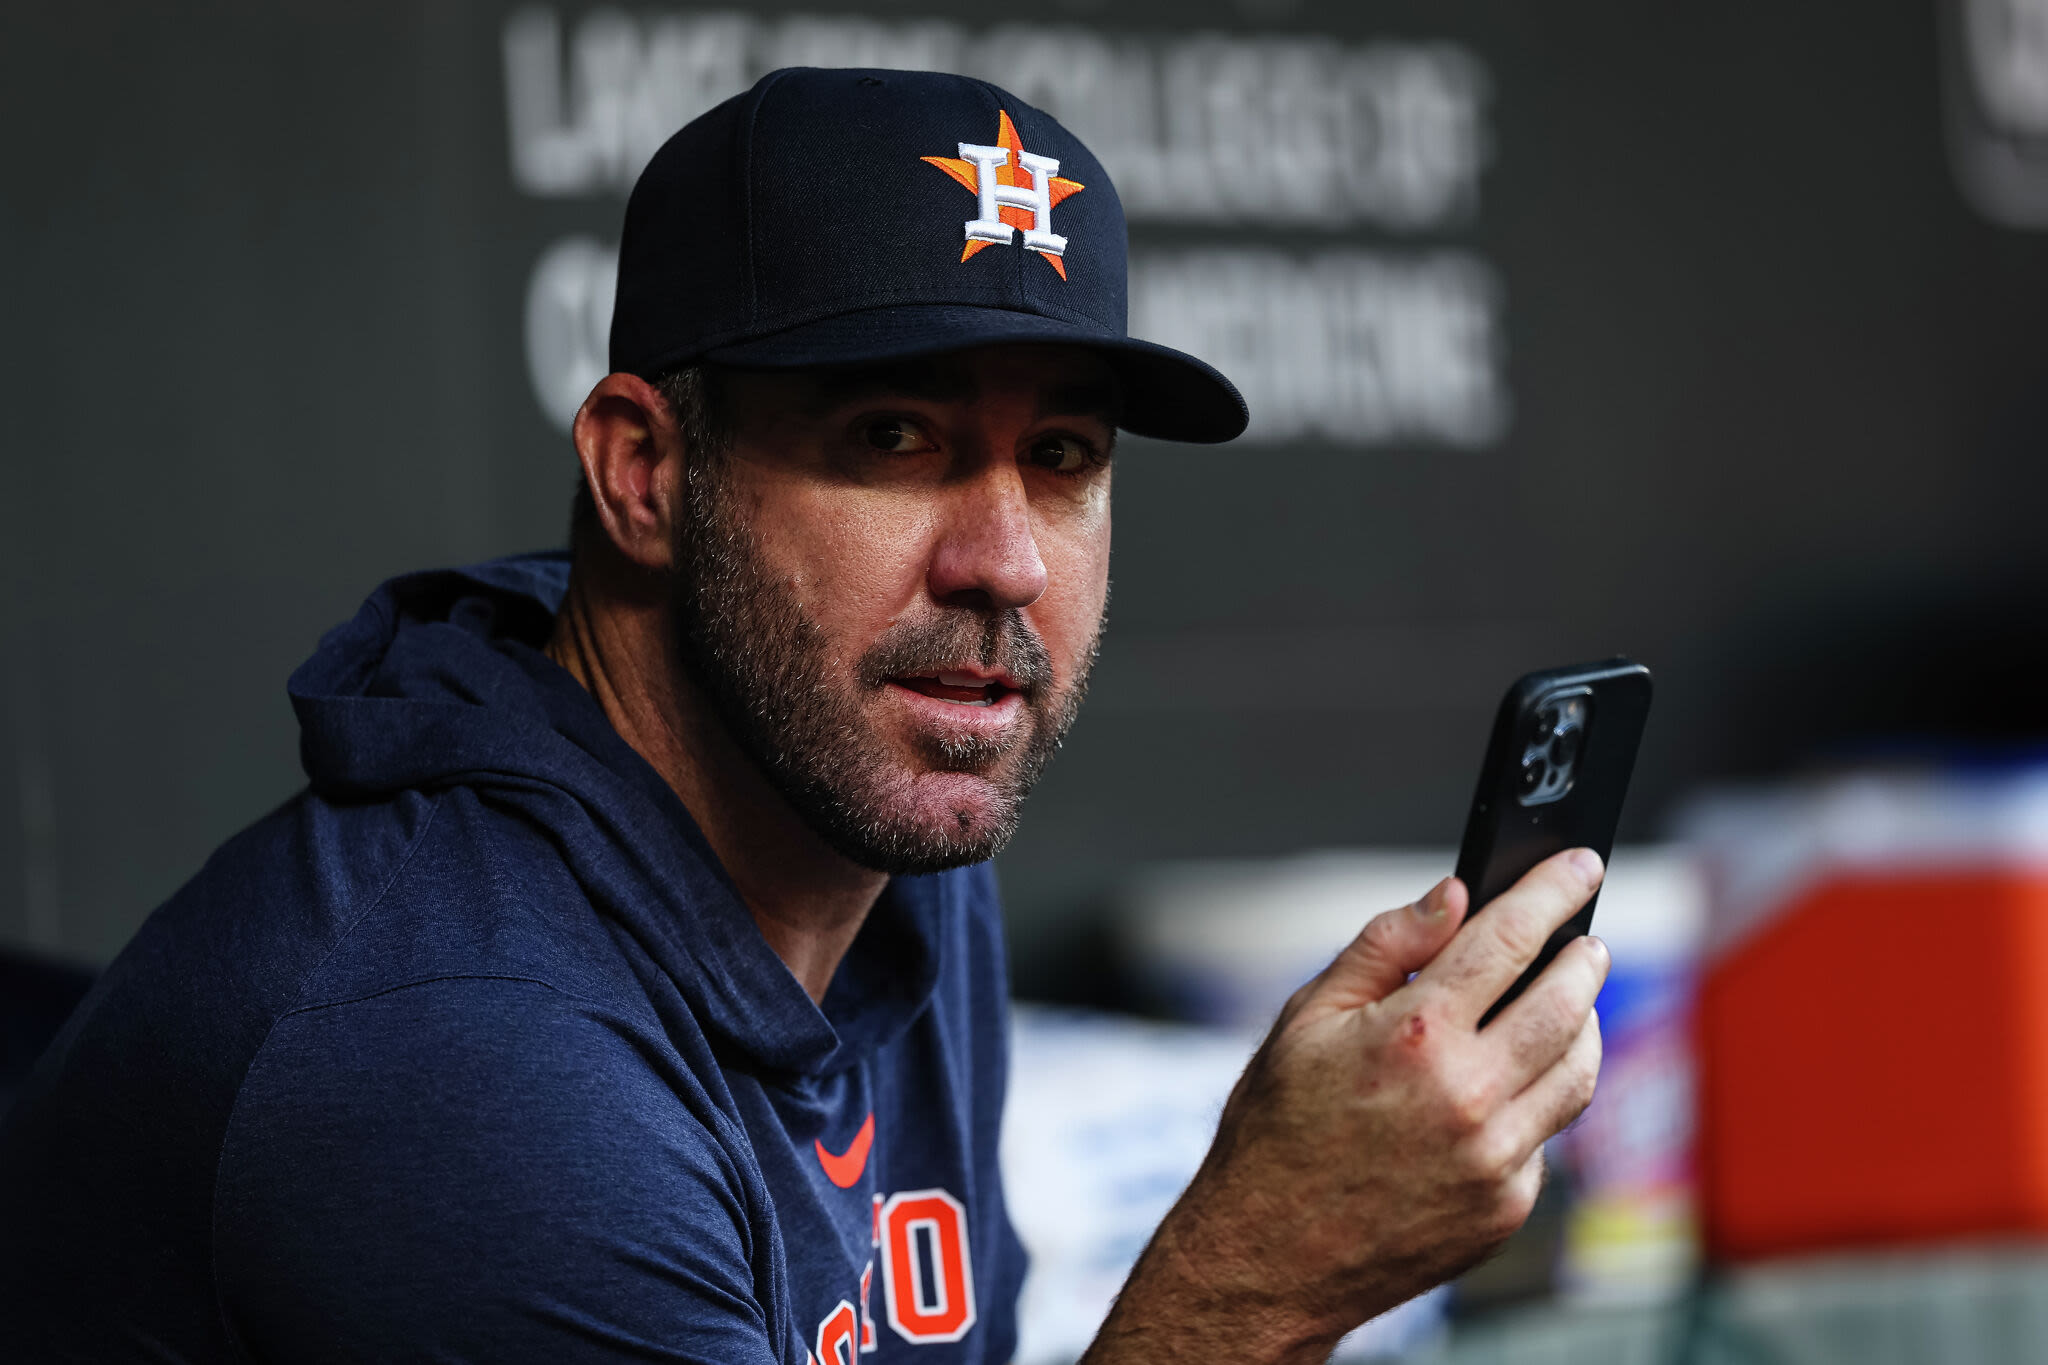 Astros stars making slow progress, but there is some good news